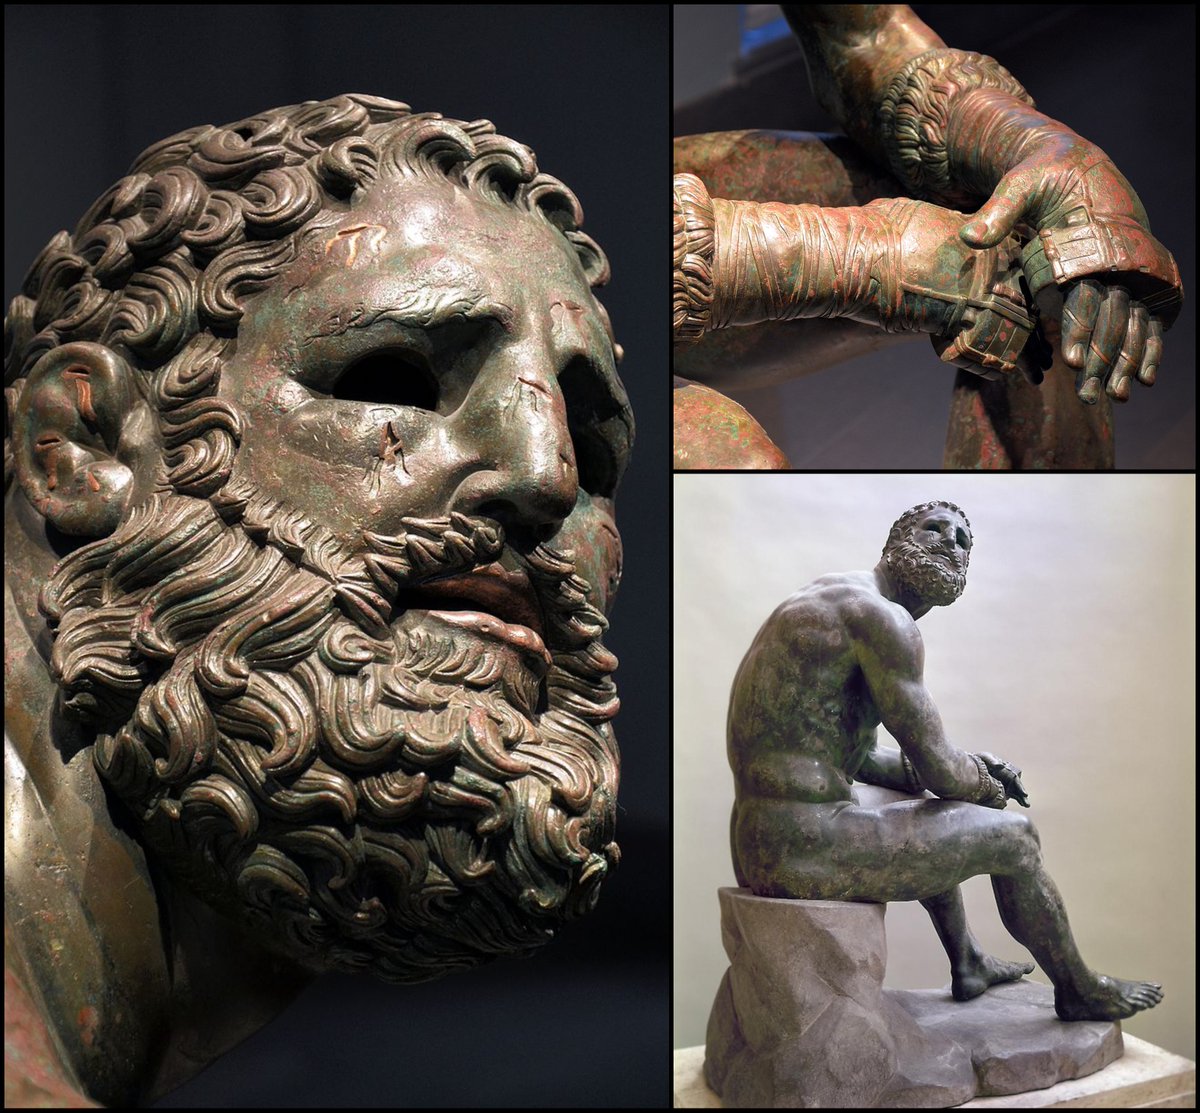 29. The Resting Boxer, crafted more than 2,000 years ago, is one of the most realistic sculptures ever made and one of the finest examples of bronze sculptures to have survived from the ancient world. It was excavated in Rome in 1885. Its incredible features, such as its pose,